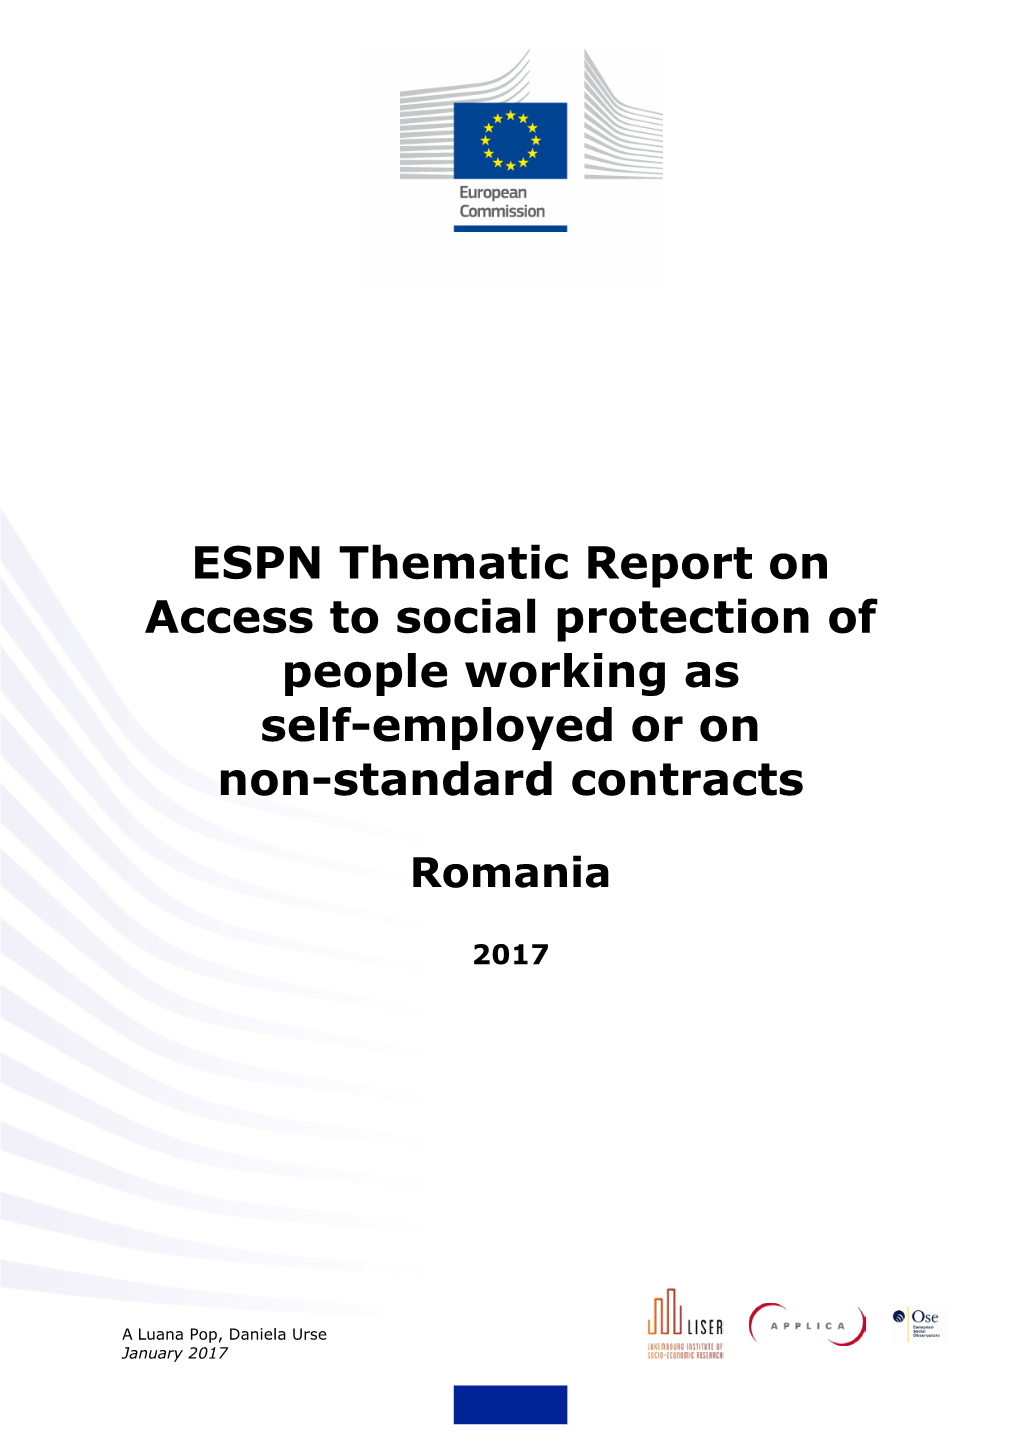 ESPN Thematic Report on Access to Social Protection of People Working As Self-Employed Or on Non-Standard Contracts